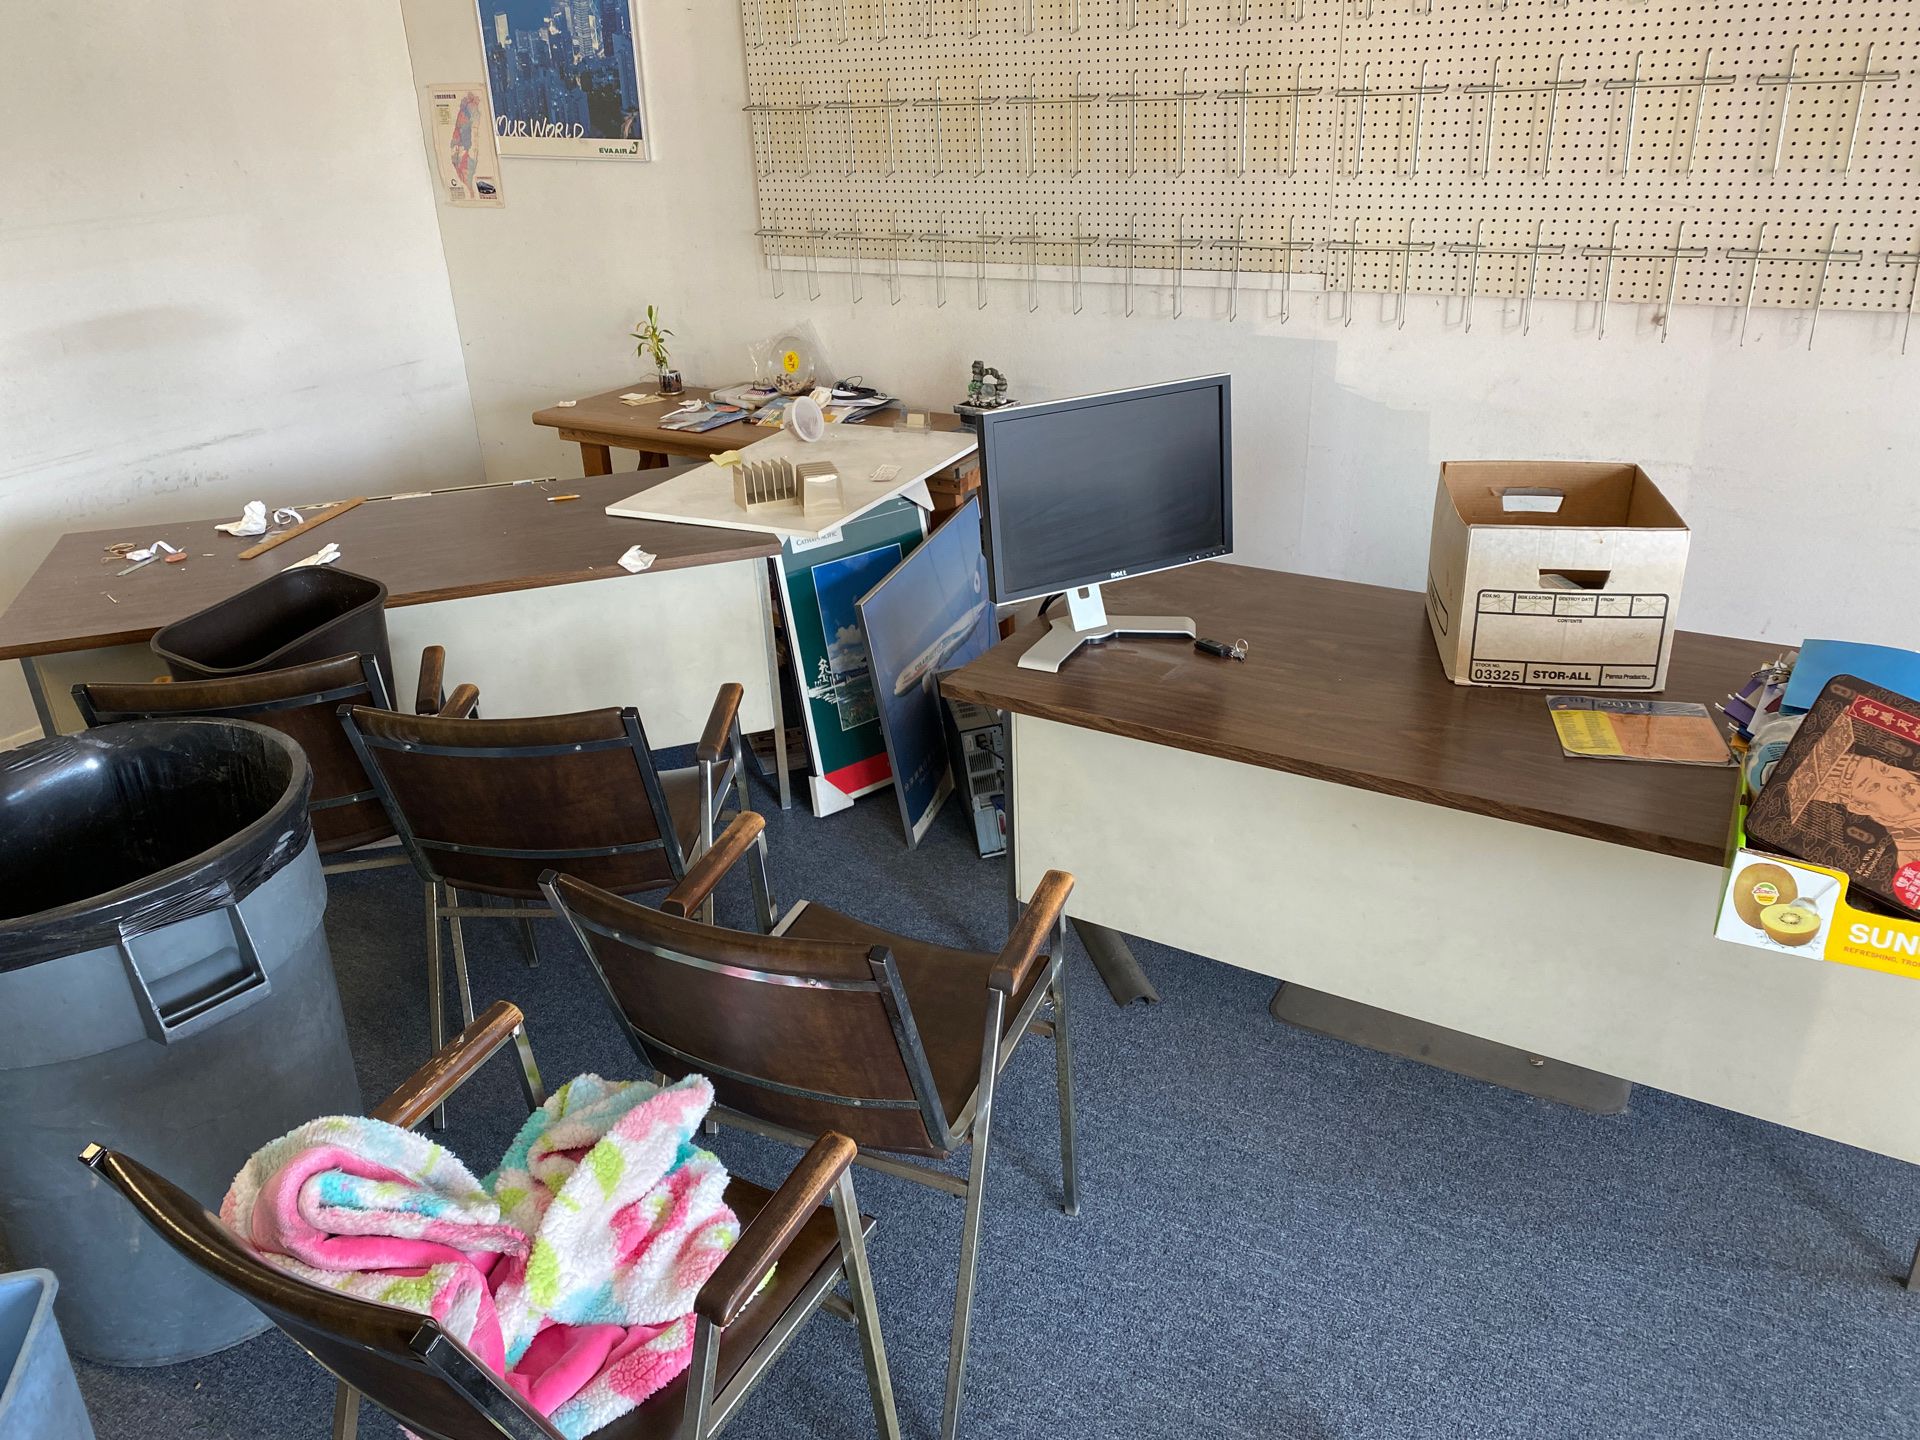 Free office desks and chairs and cabinets